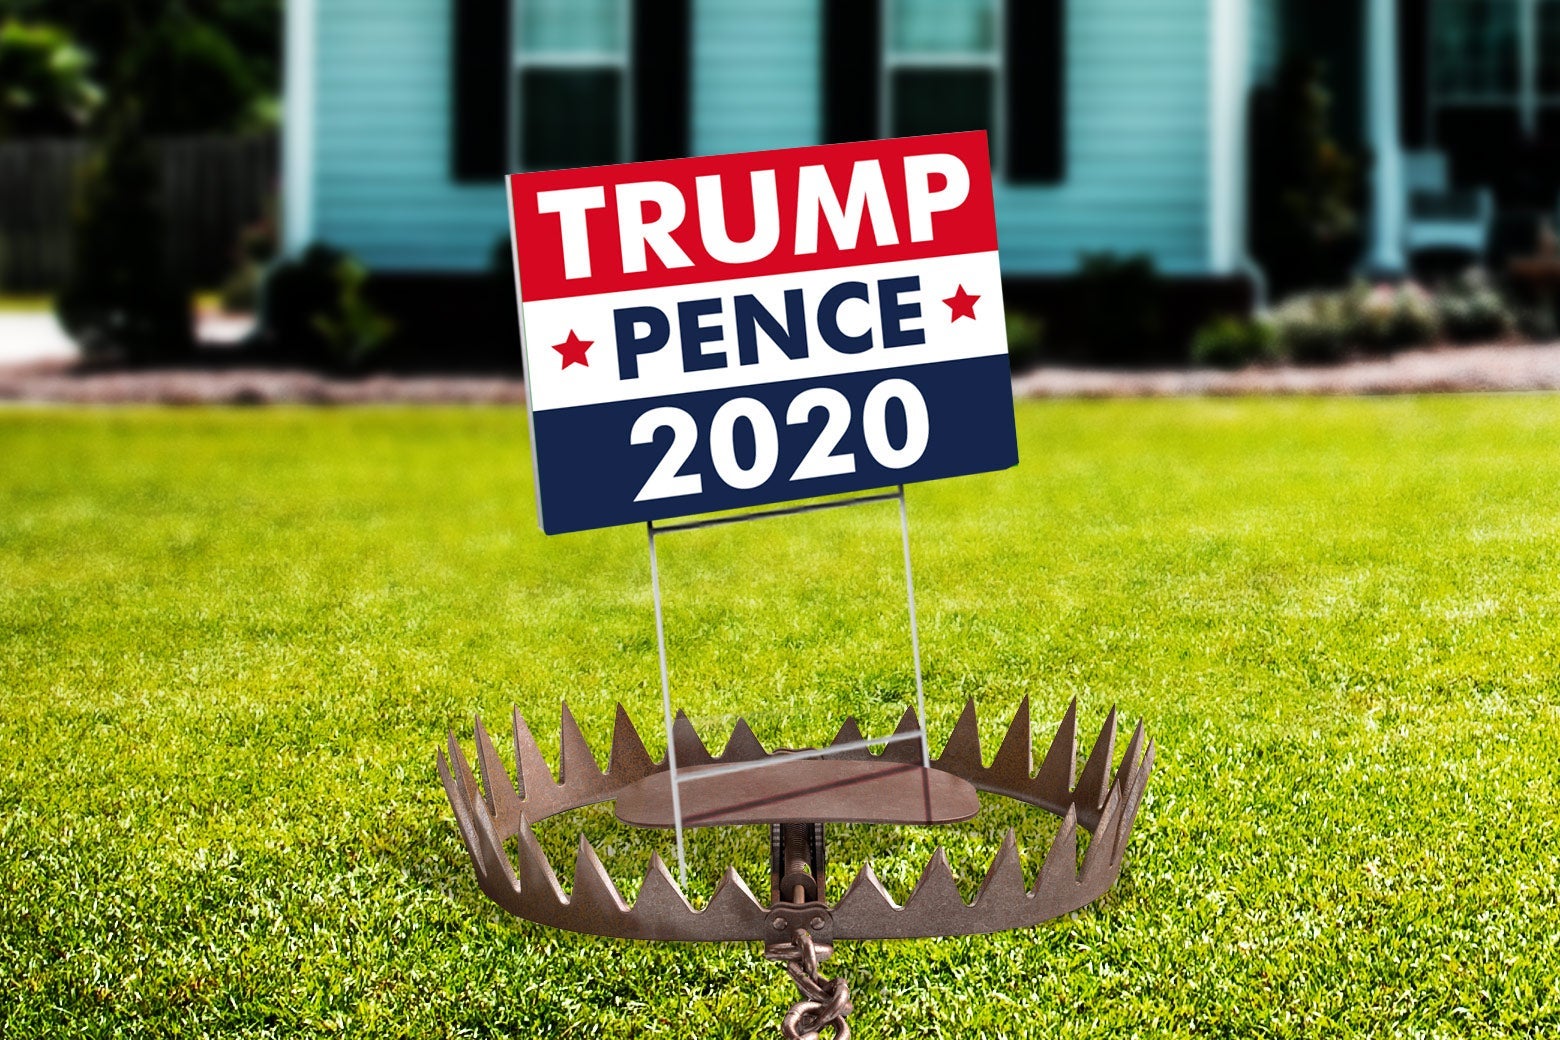 A Trump-Pence 2020 sign is seen on a lawn, with a spiked trap attached to it.